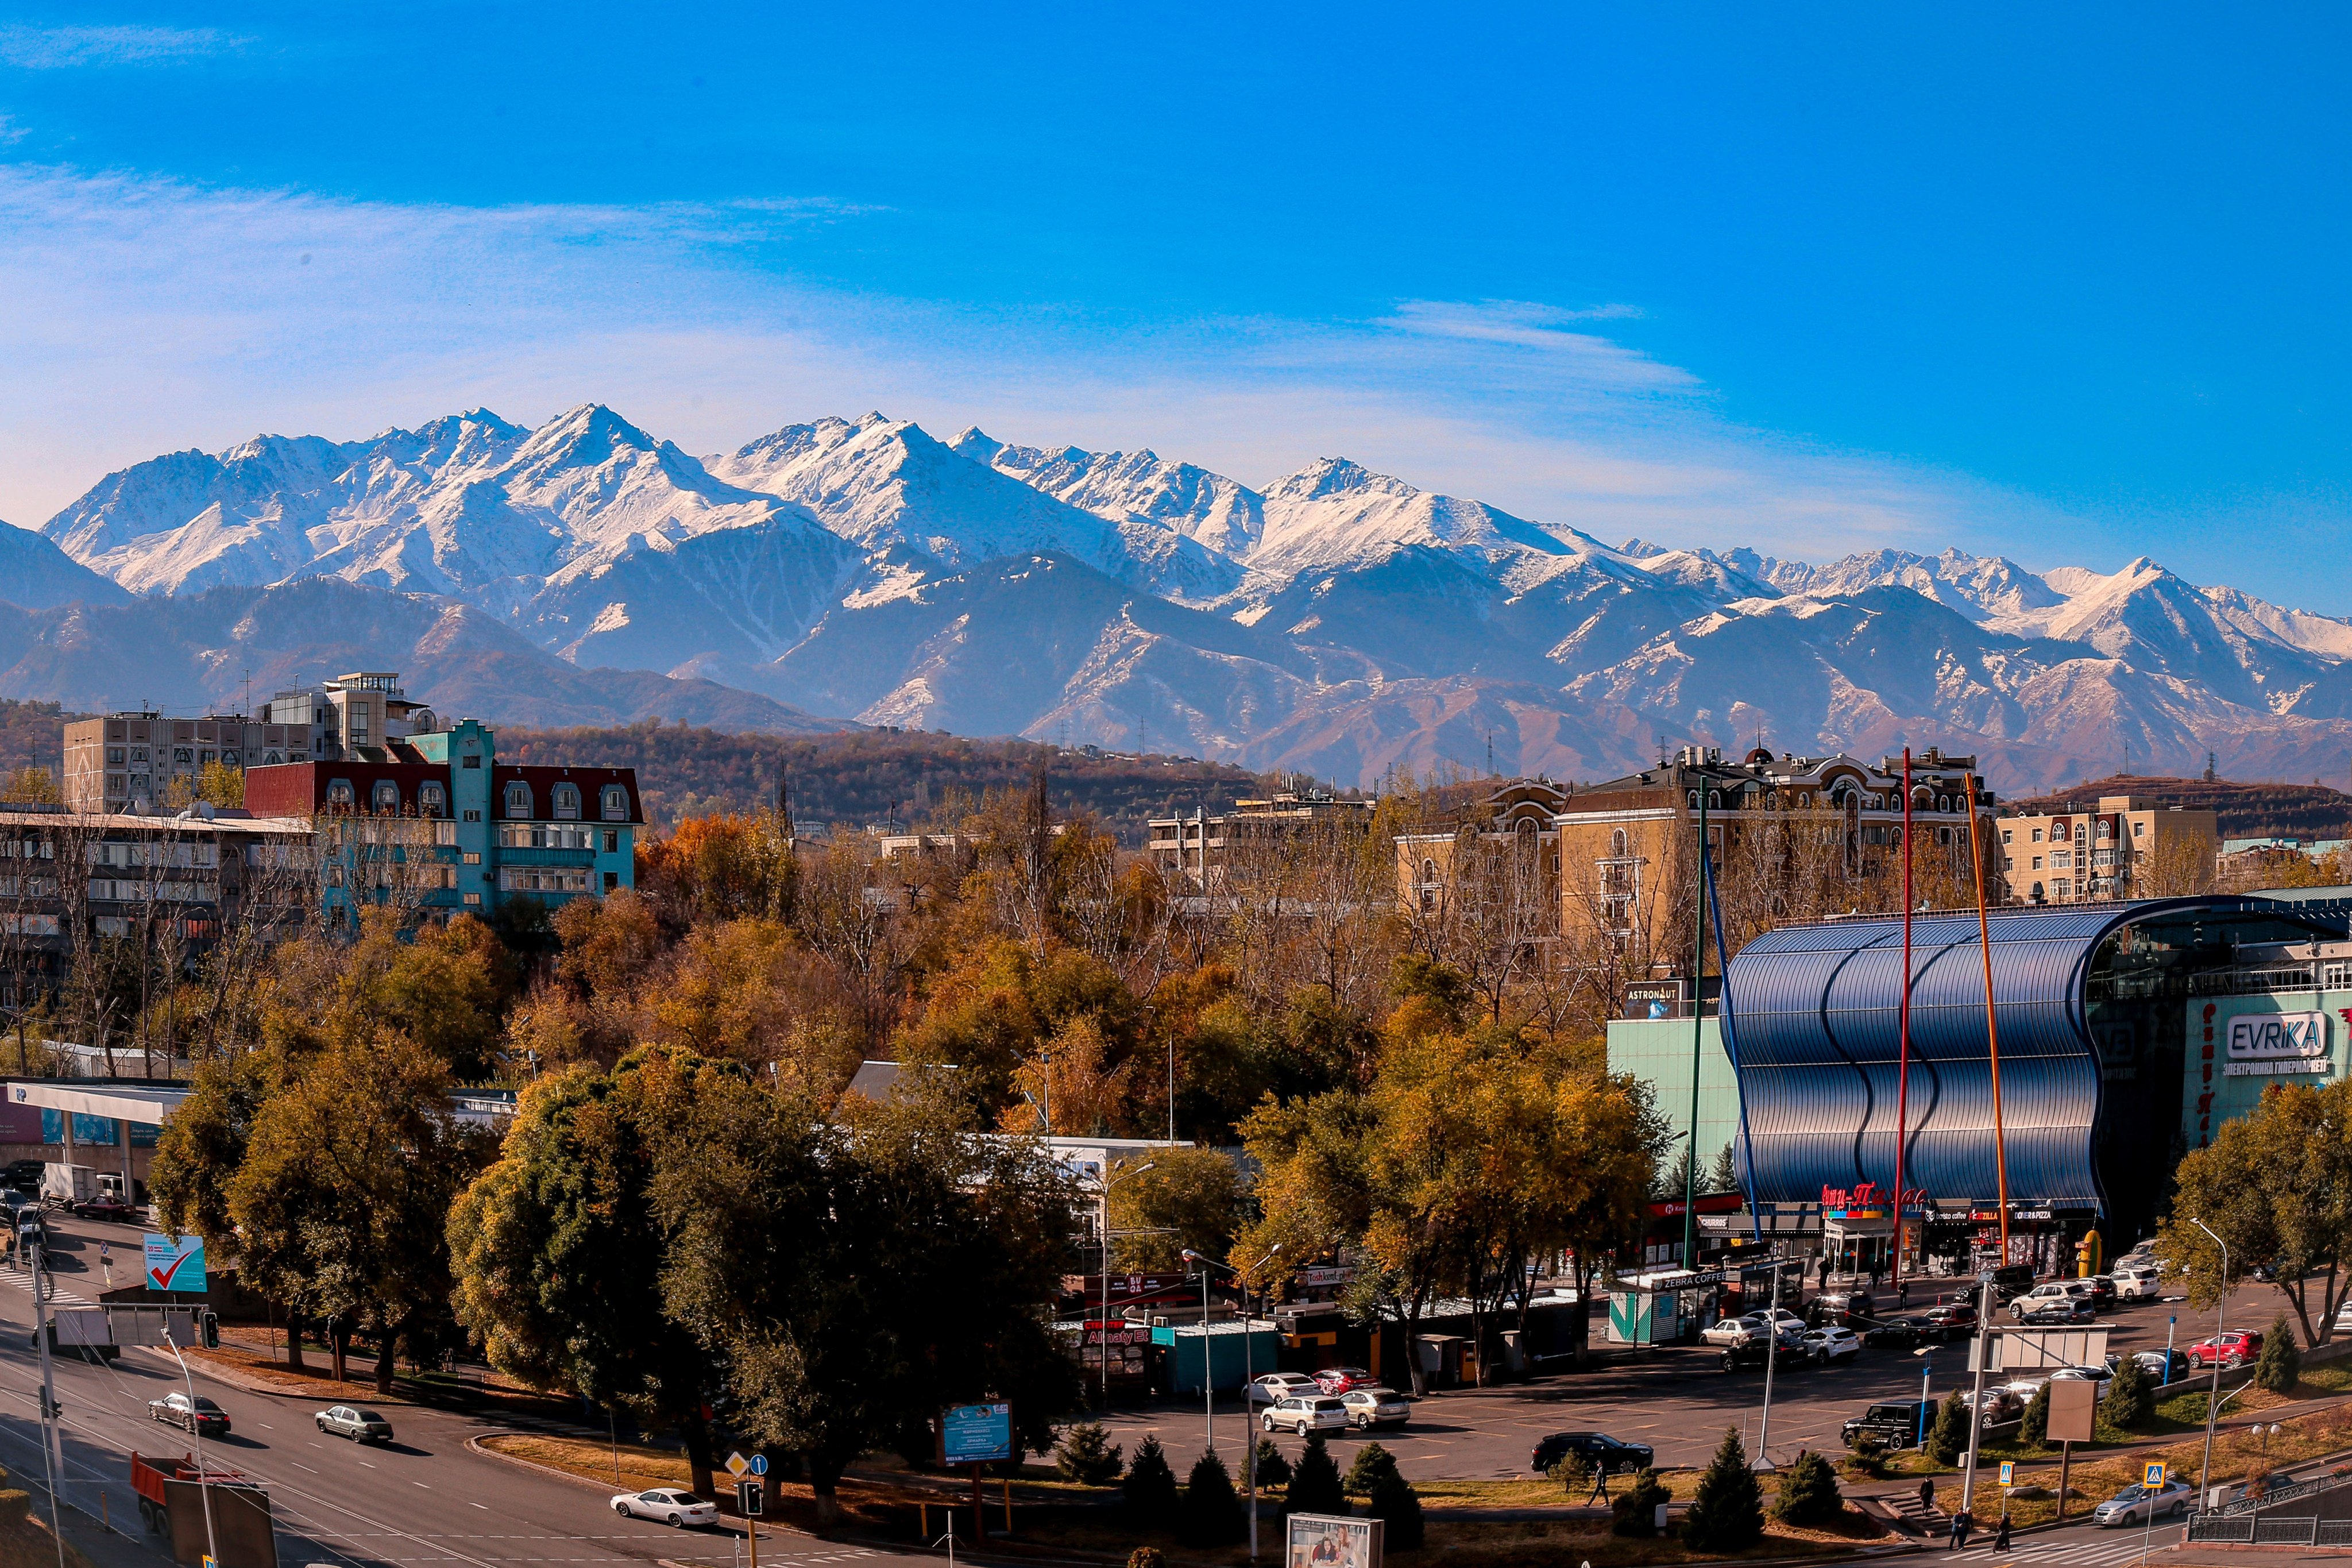 The city of Almaty, in Kazakhstan, from where the China-Kazakhstan (Lianyungang) logistics cooperation base was launched in 2014 as the first belt and road project. It has since become an important platform for products from Central Asian countries to reach seaports. Photo: Xinhua